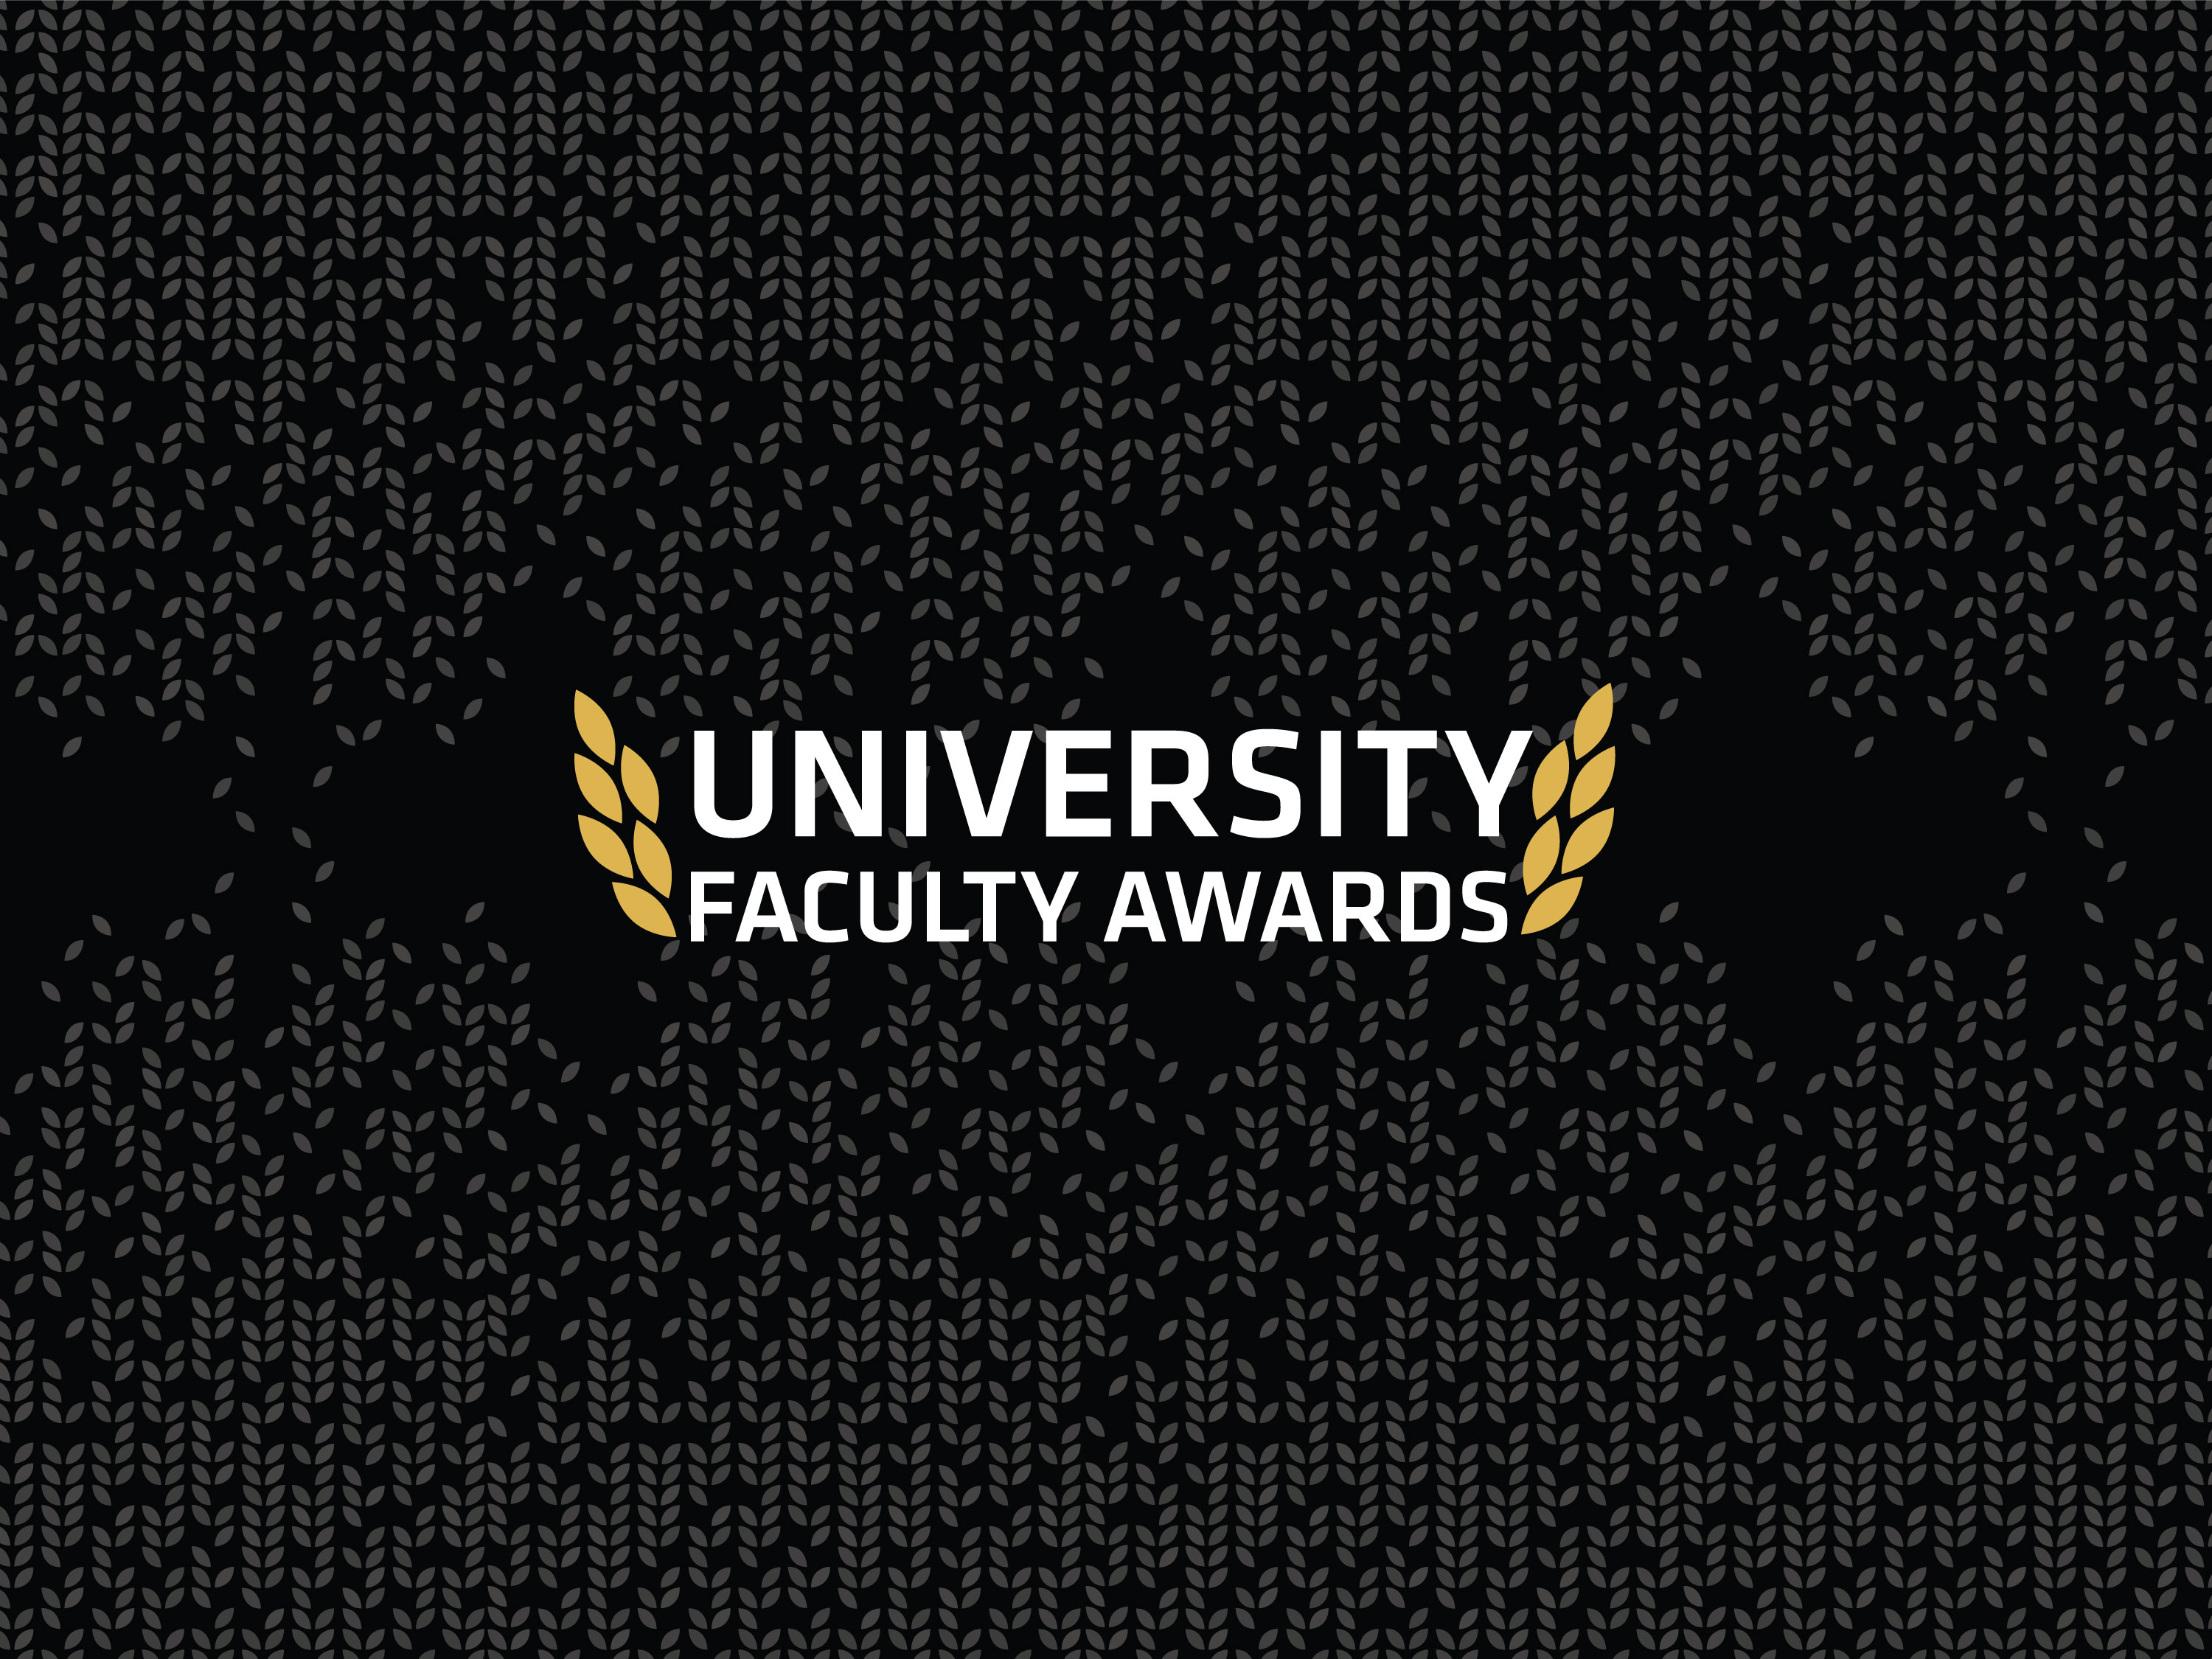 University Faculty Awards banner graphic